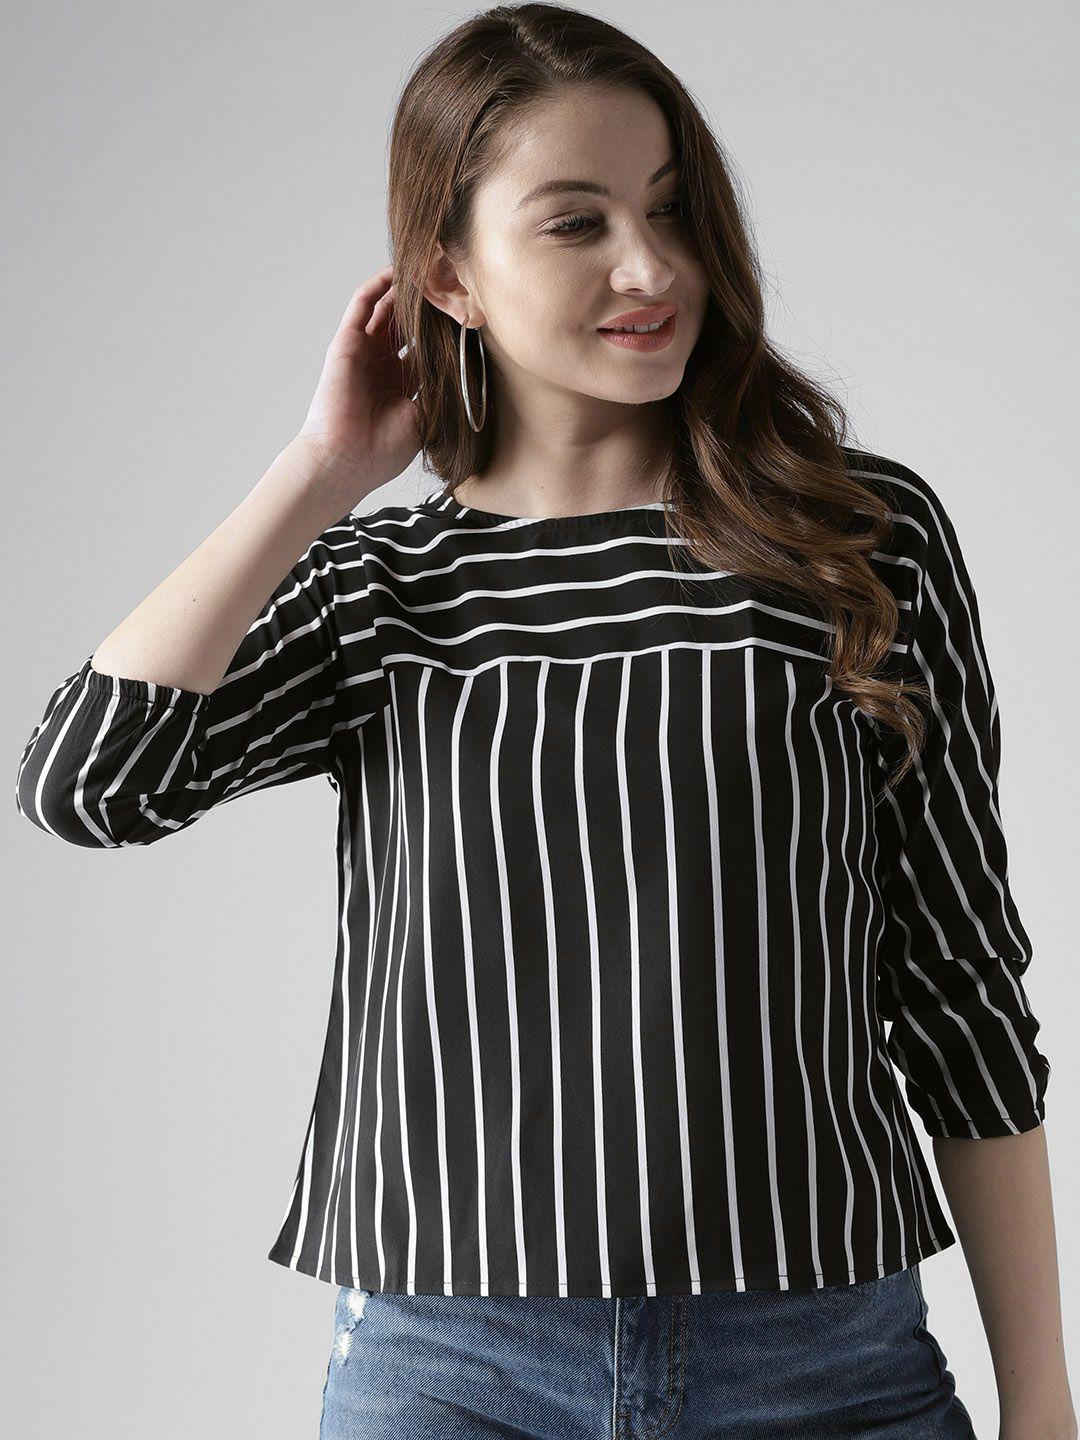 style-quotient-by-noi-women-black-&-white-striped-boxy-top